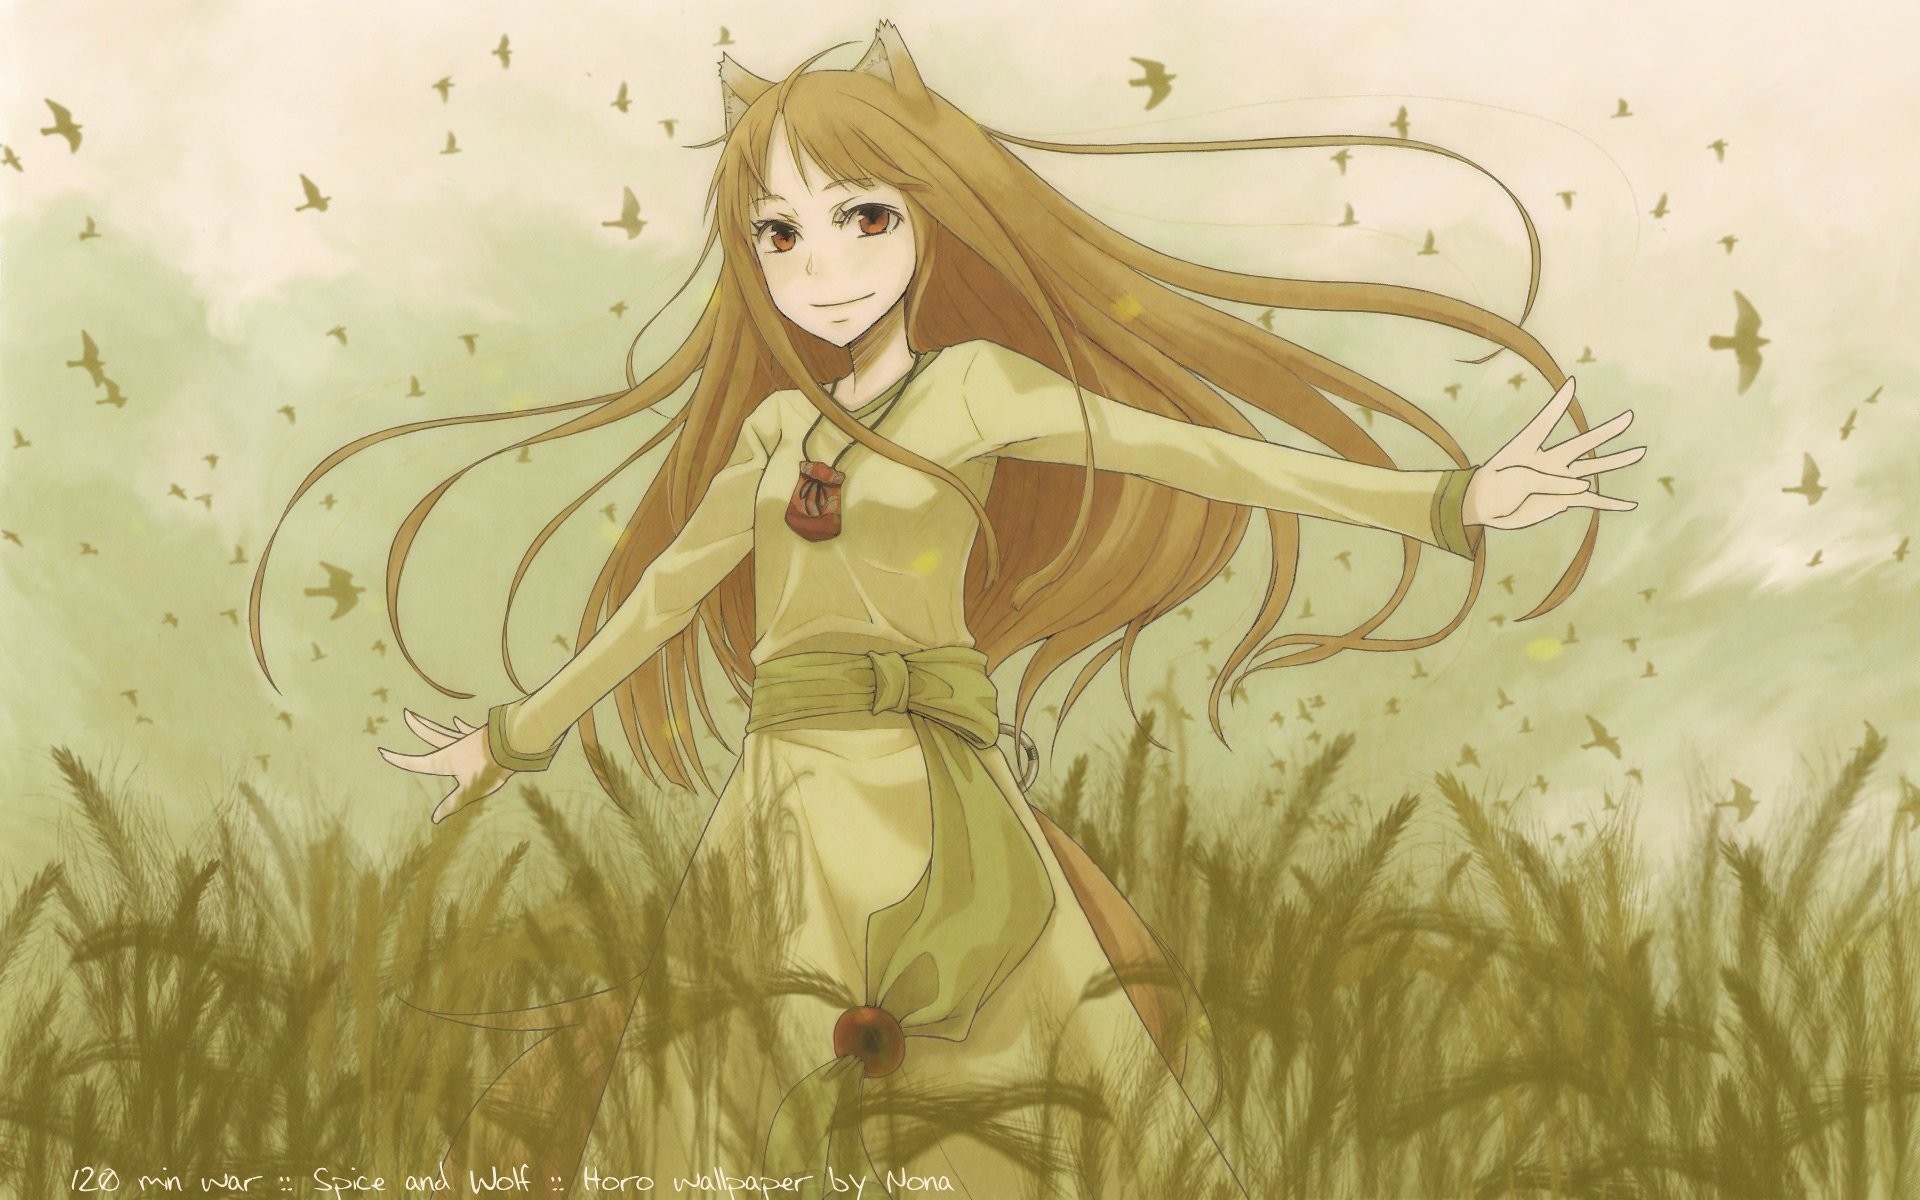 Anime – Spice and Wolf Wallpaper